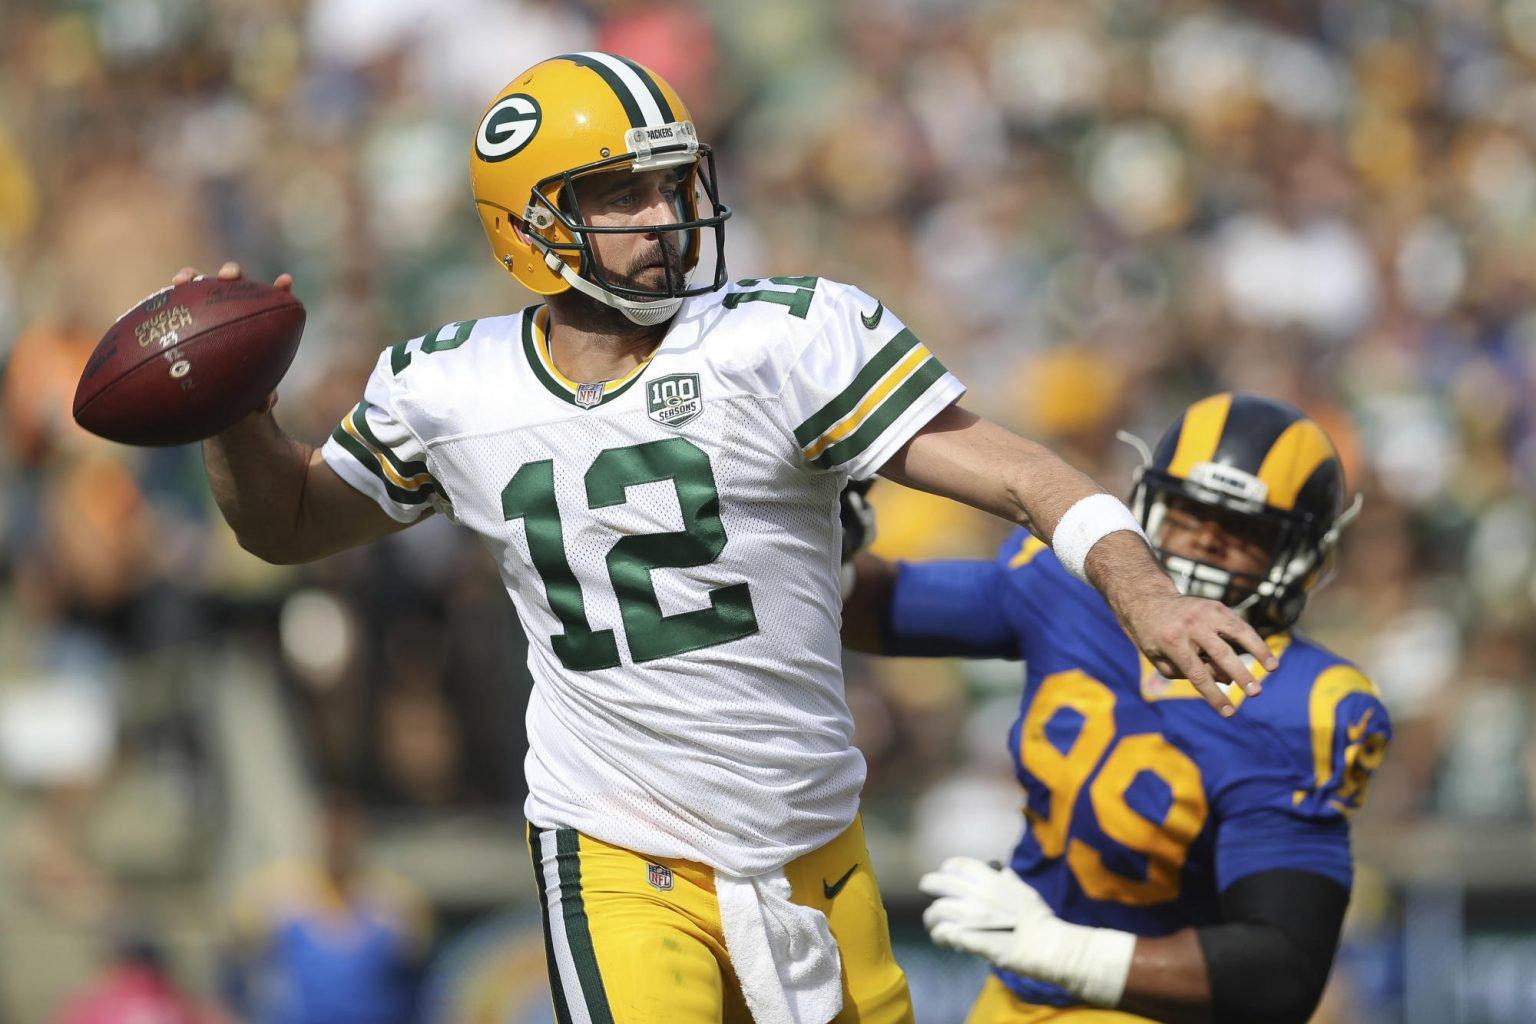 The Aaron Rodgers update and the effect on NFL futures